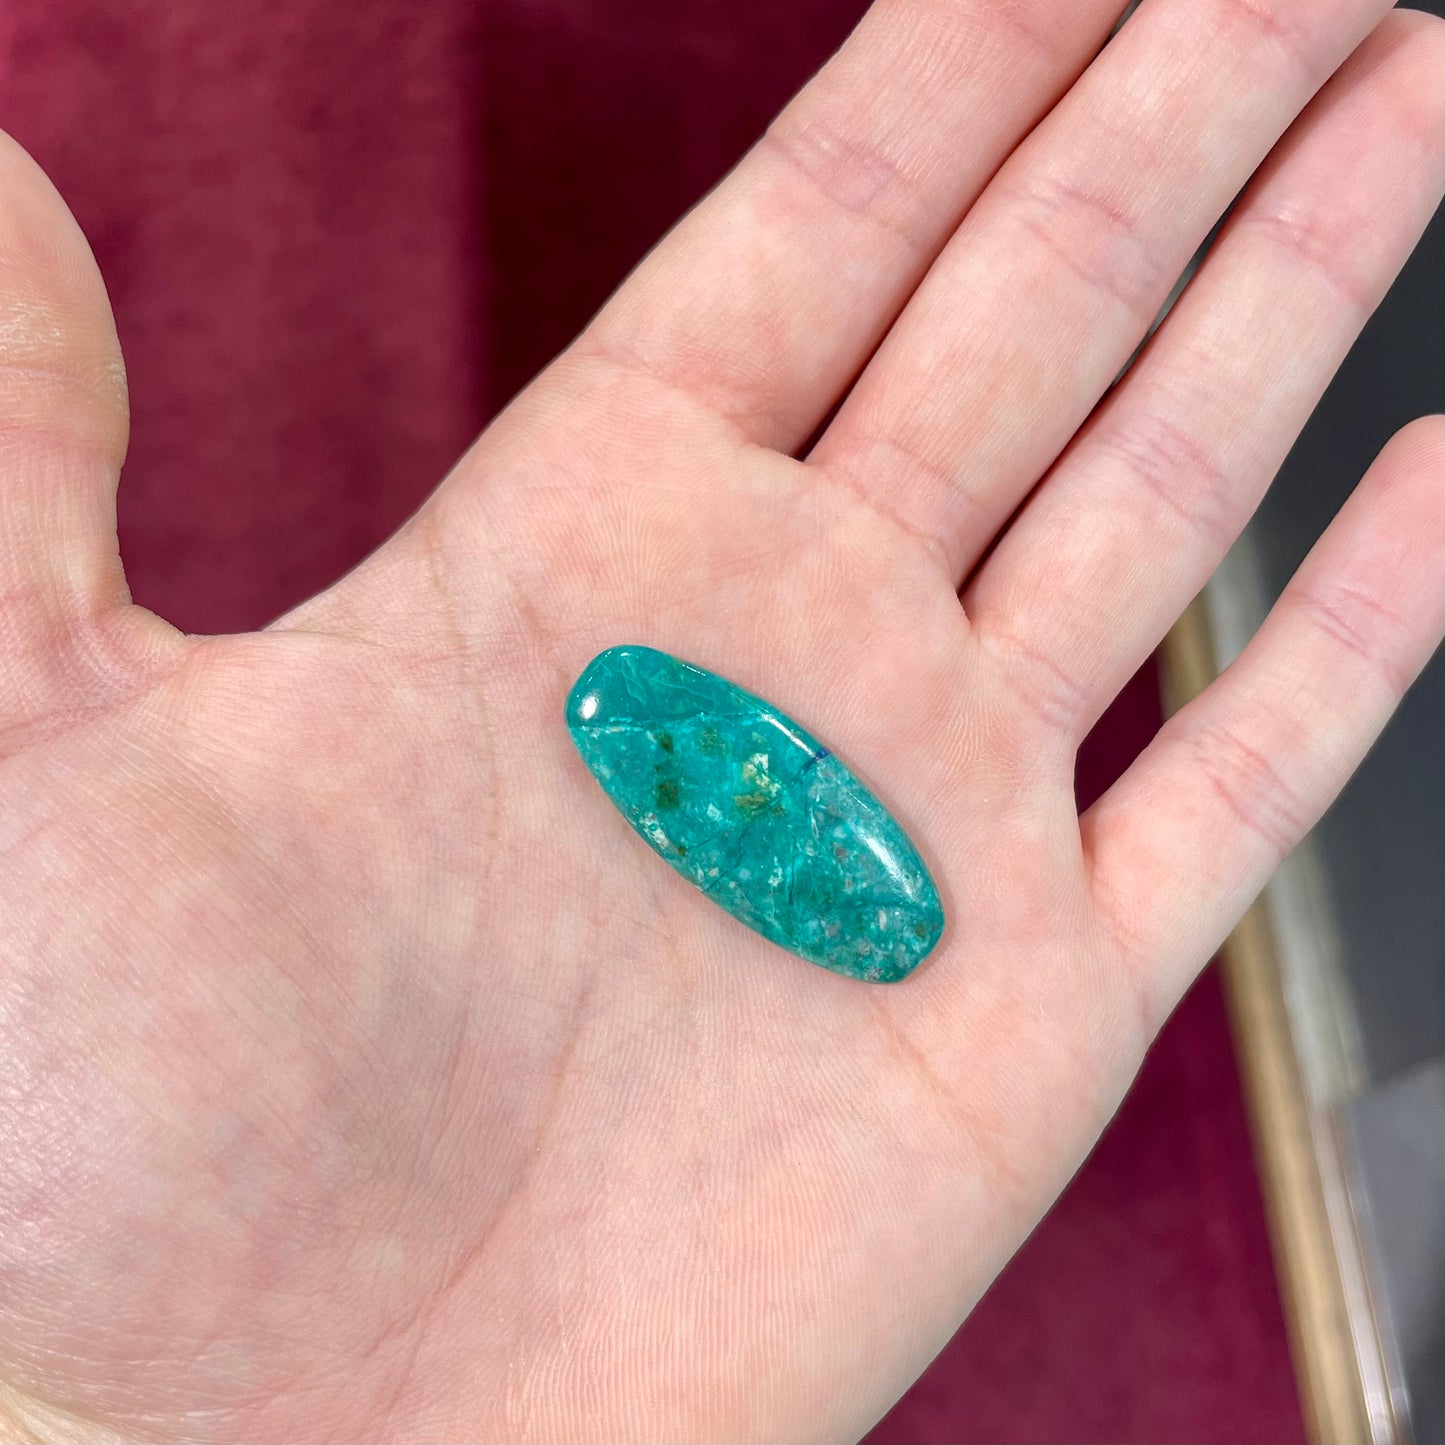 A loose, oval cabochon cut chrysocolla stone with blue azurite inclusions.